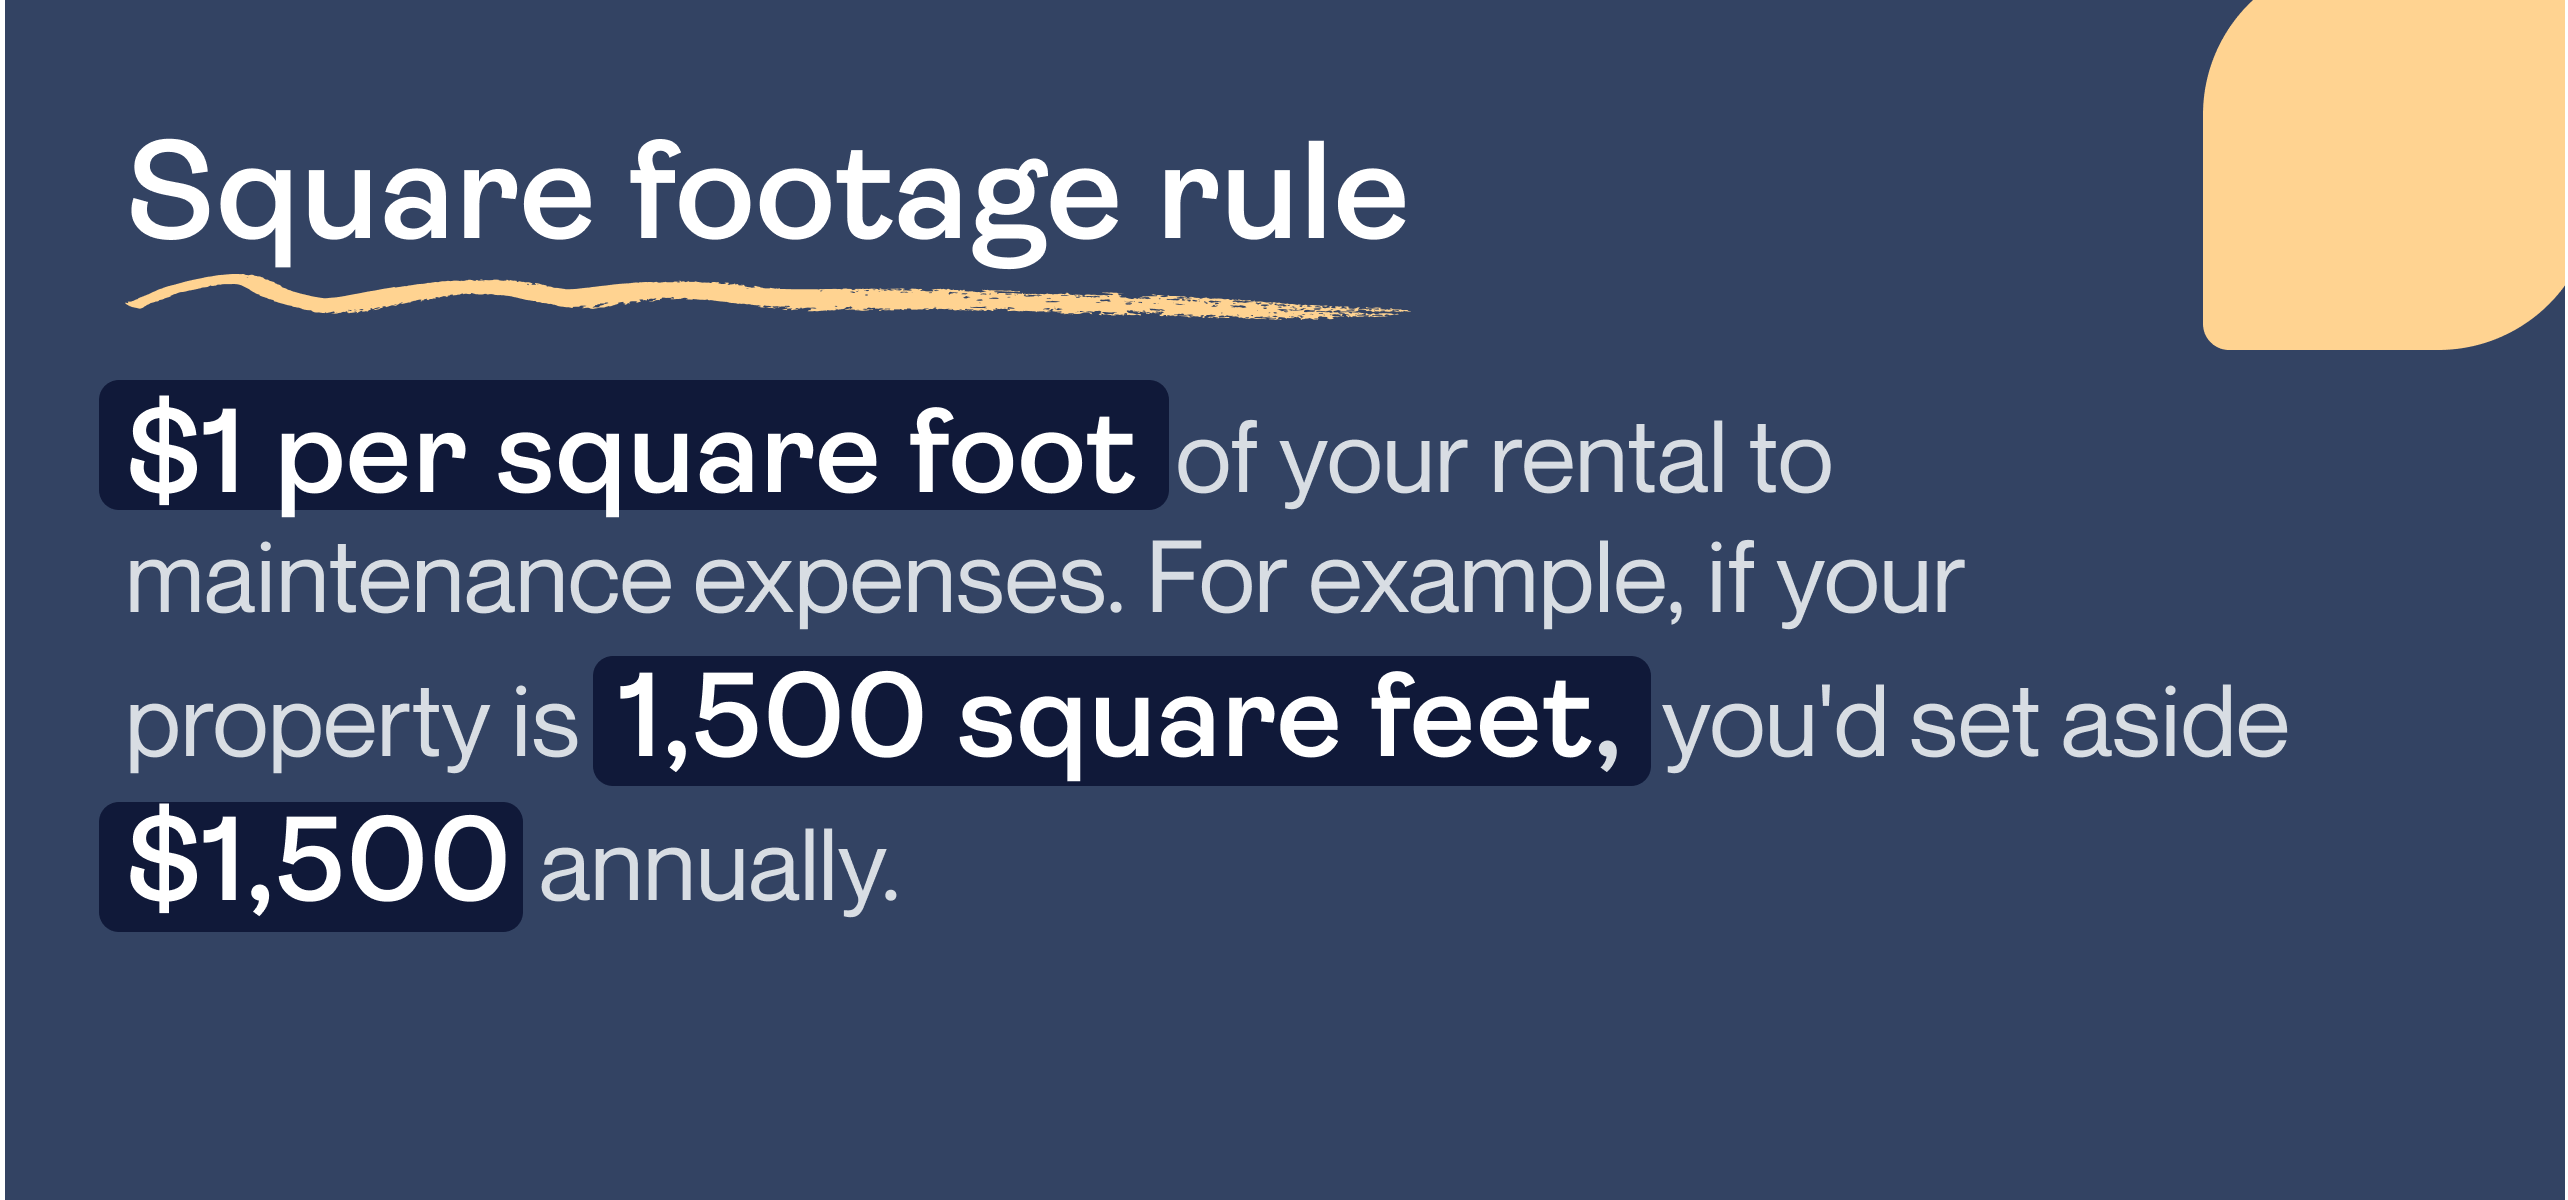 Square footage rule: $1 per square foot of your rental to maintenance expenses. For example, if your property is 1,500 square feet, you'd set aside $1,500 annually.